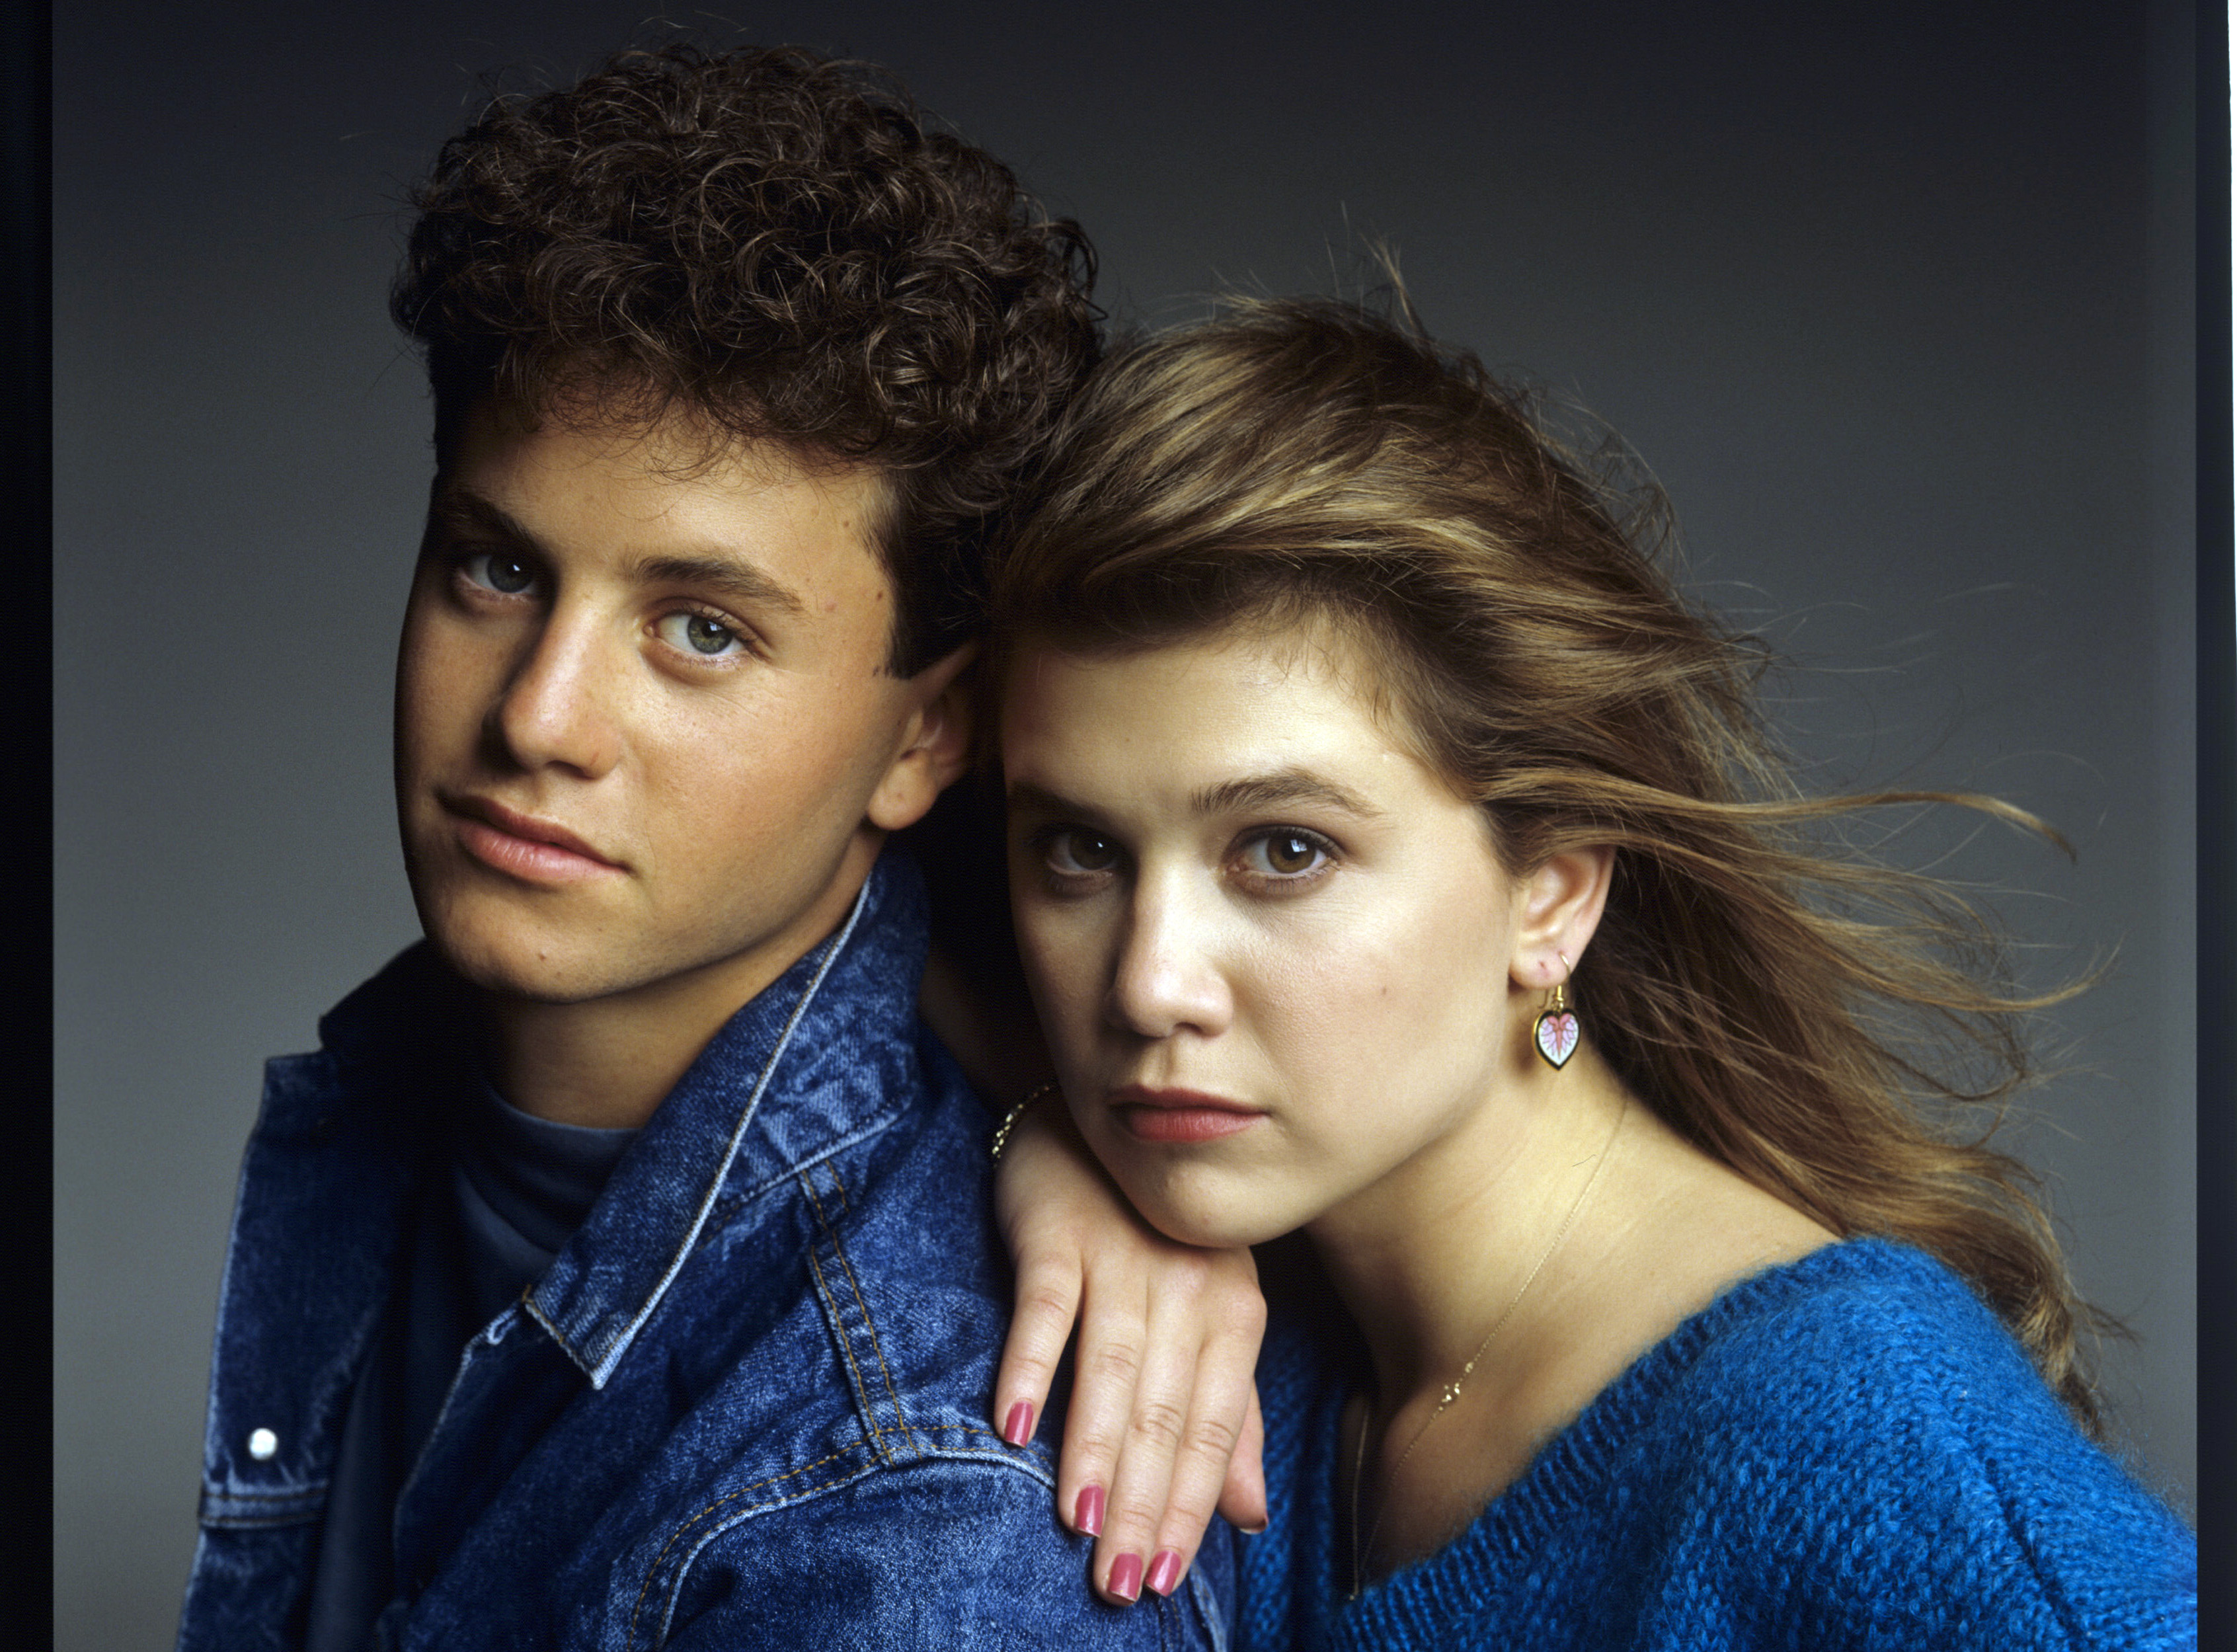 Kirk Cameron and Tracey Gold during a photoshoot for "Growing Pains" on June 27, 1989. | Source: Getty Images